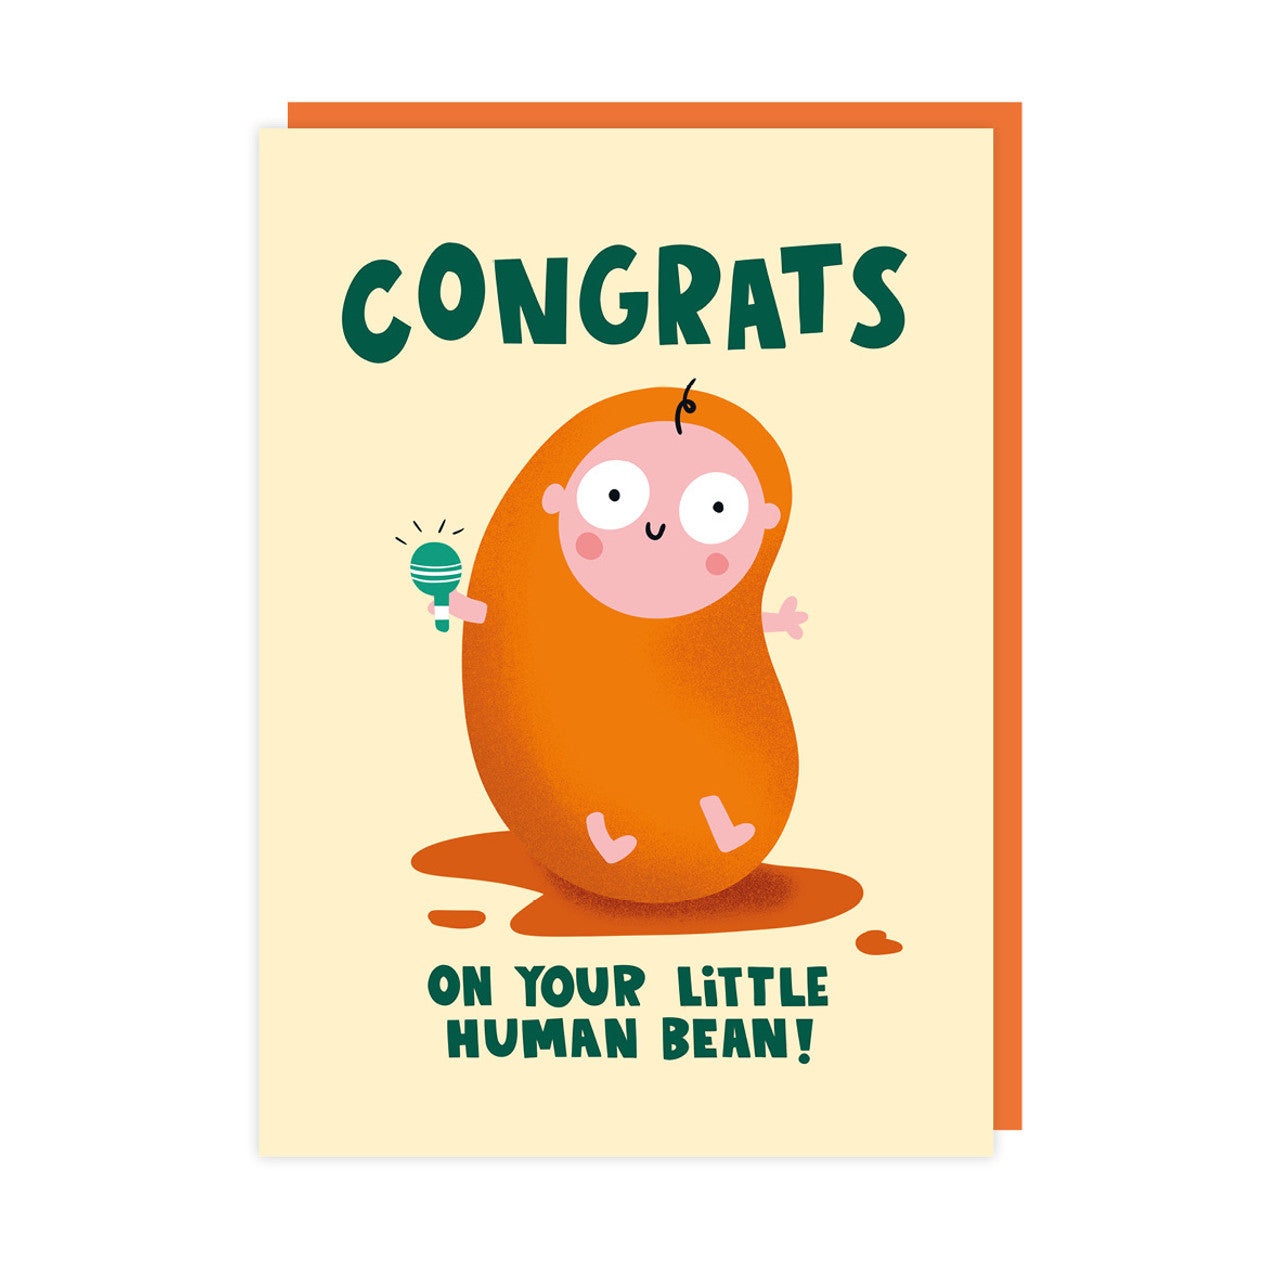 New Baby Card text reads "Congrats on your little human bean"